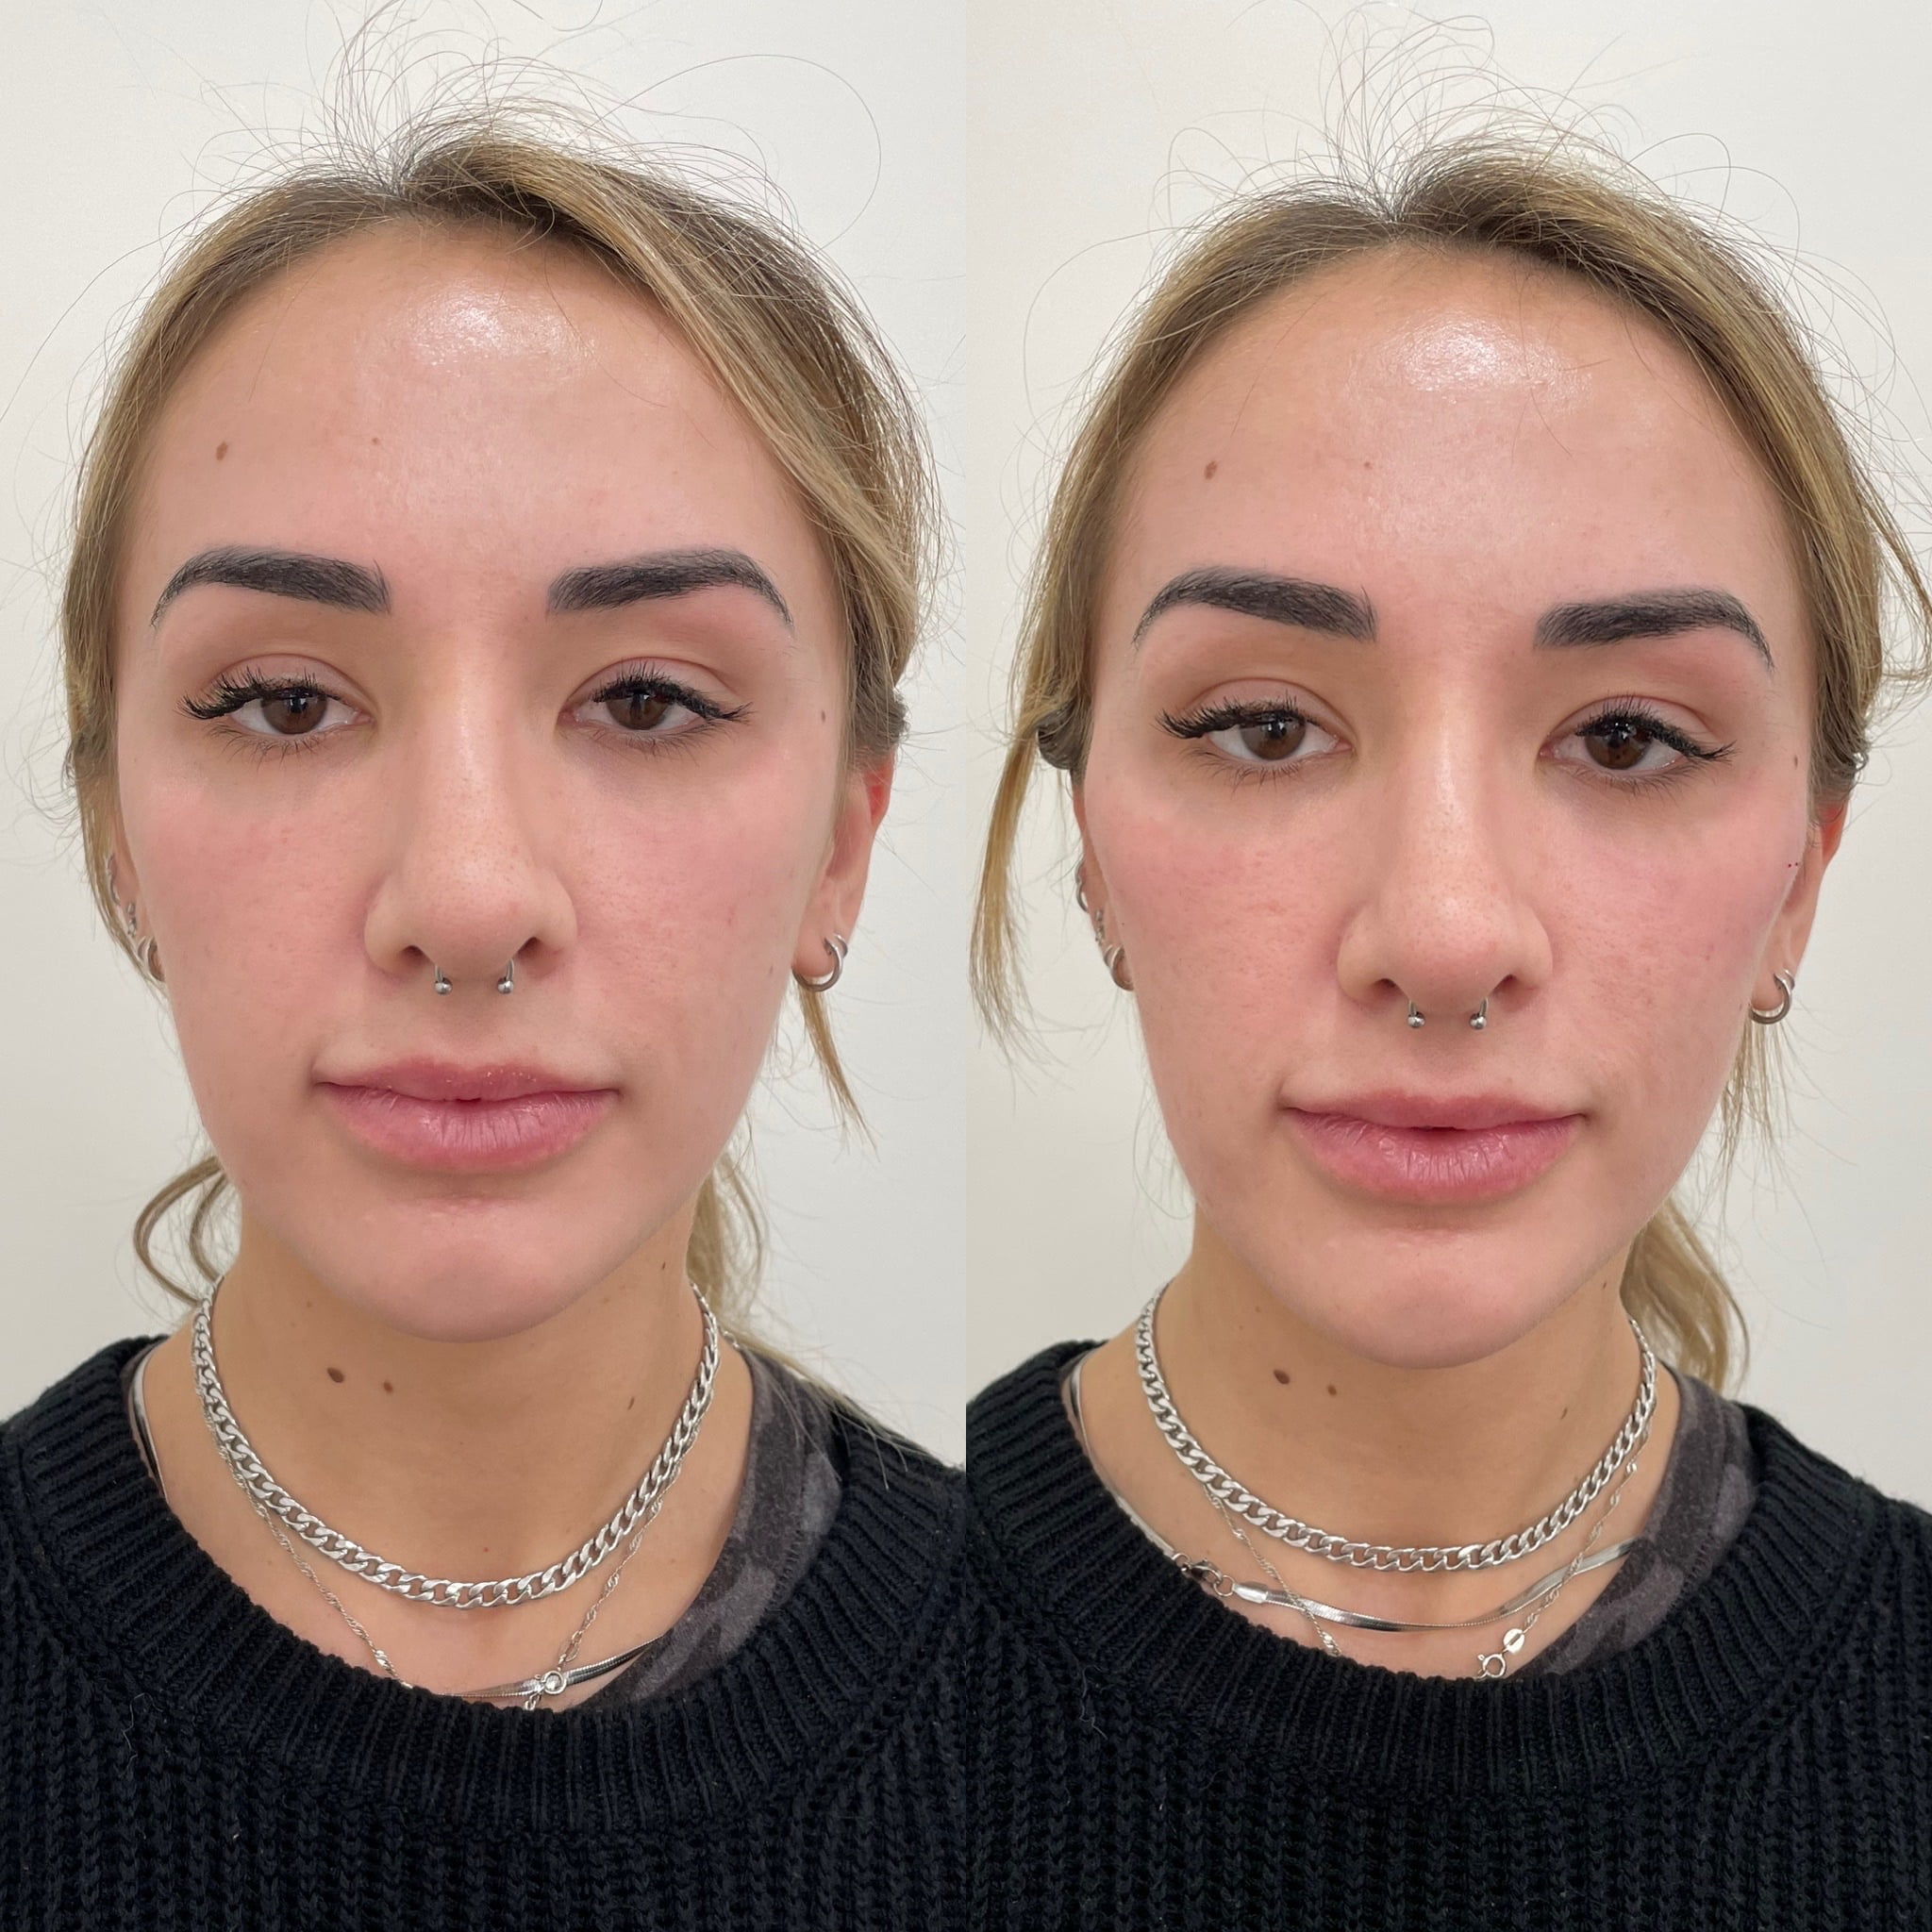 Before and After Cheeks after treatment in Beauty Boost Med Spa at Newport Beach, CA